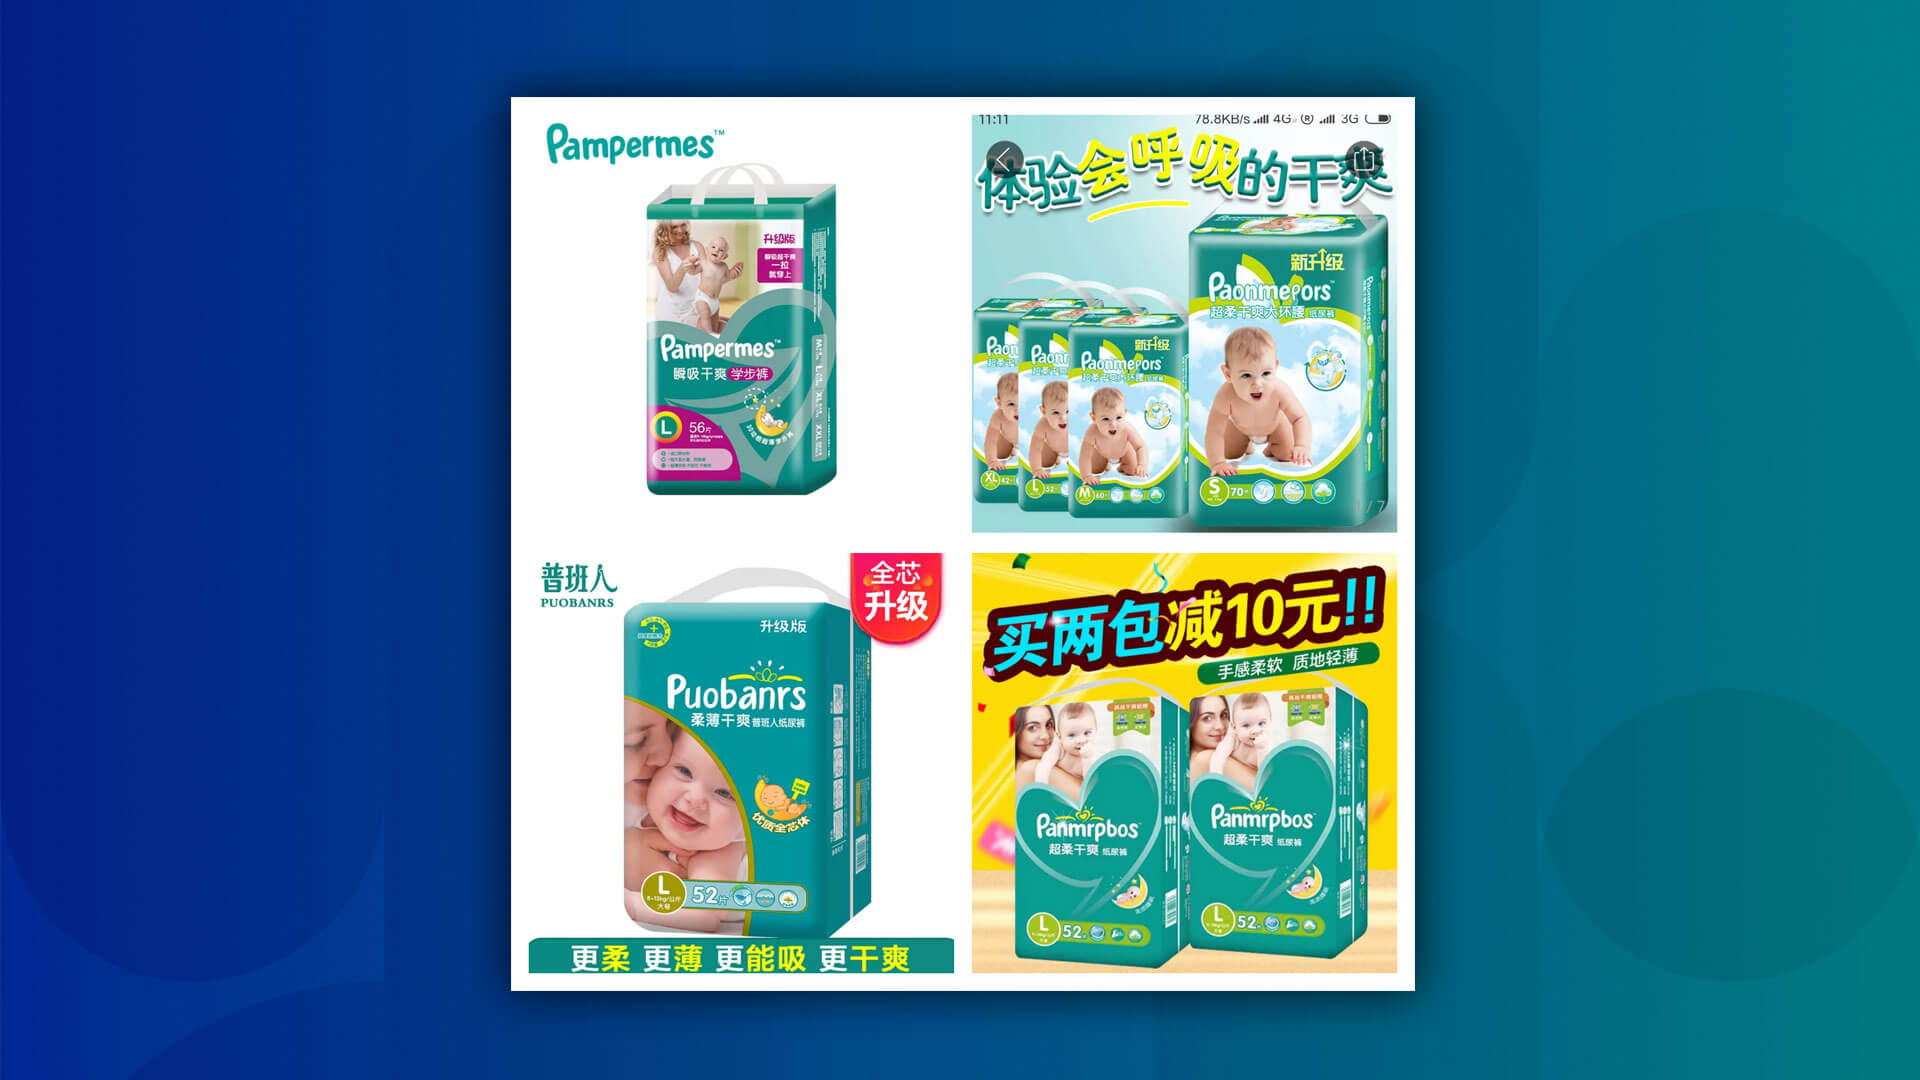 Pampermes, Paonmepors, Puobanrs, Pam…what?! Screenshots of cloned Pampers sold on Pinduoduo ecommerce platform. (Picture: Pinduoduo)